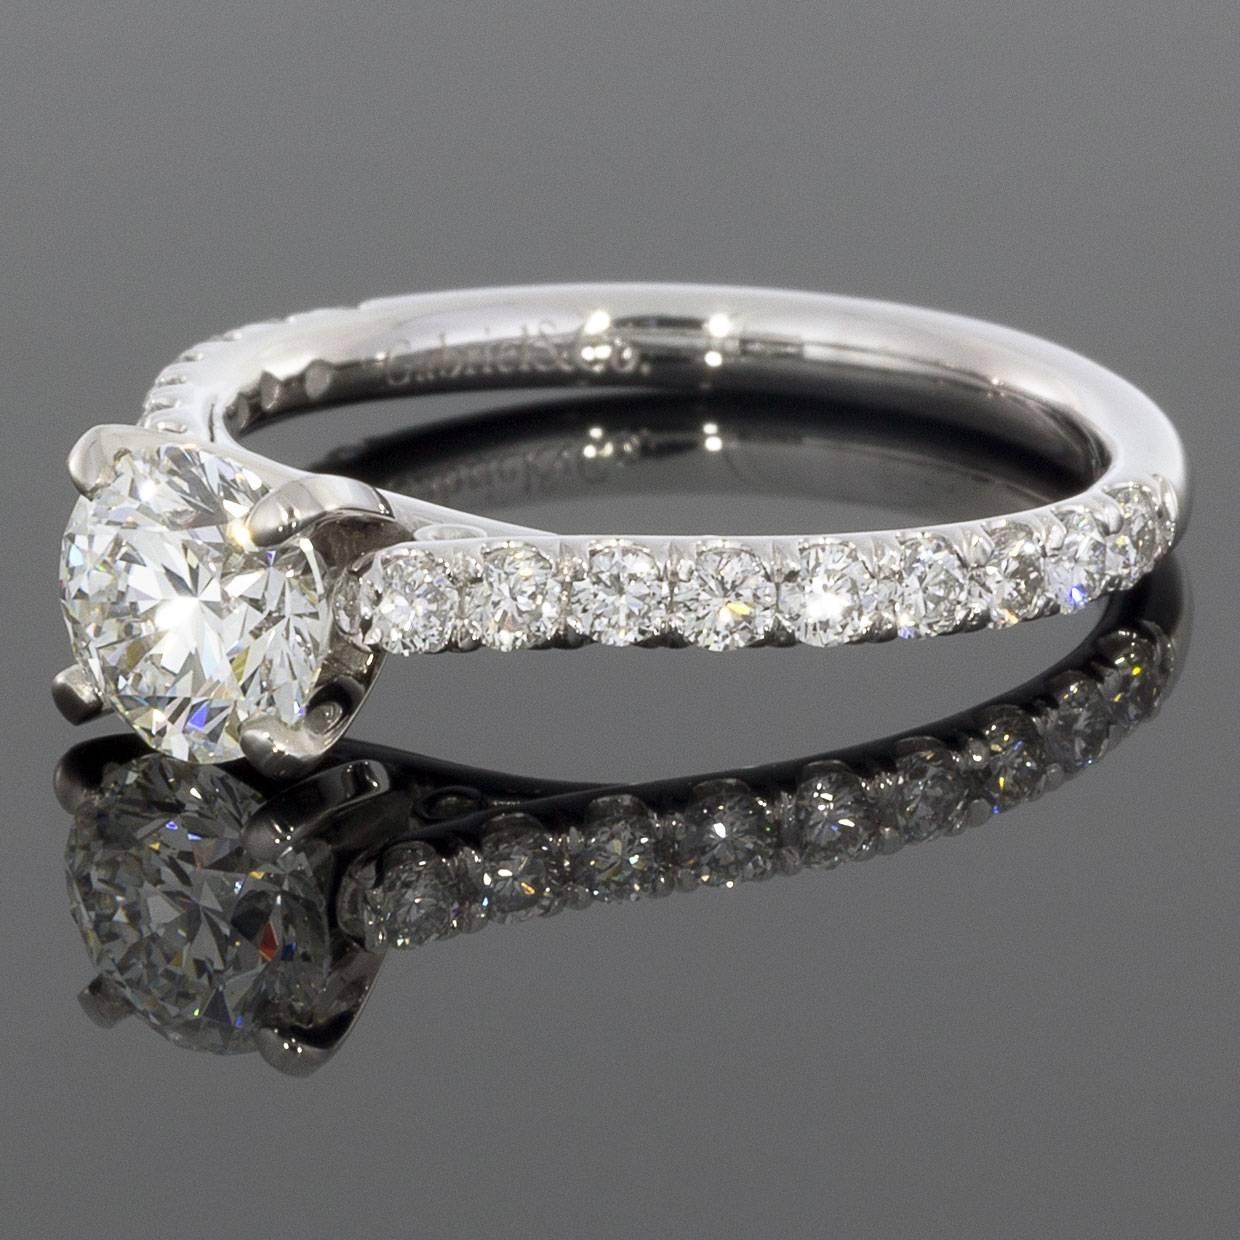 Description:
14K White Gold
0.90CT F/SI2 round center diamond
0.52CTW accent diamonds
Finger size 6.5
Reg. $7500
Comes in a beautiful presentation box
An adult signature will be required for delivery unless other arrangements are made prior to